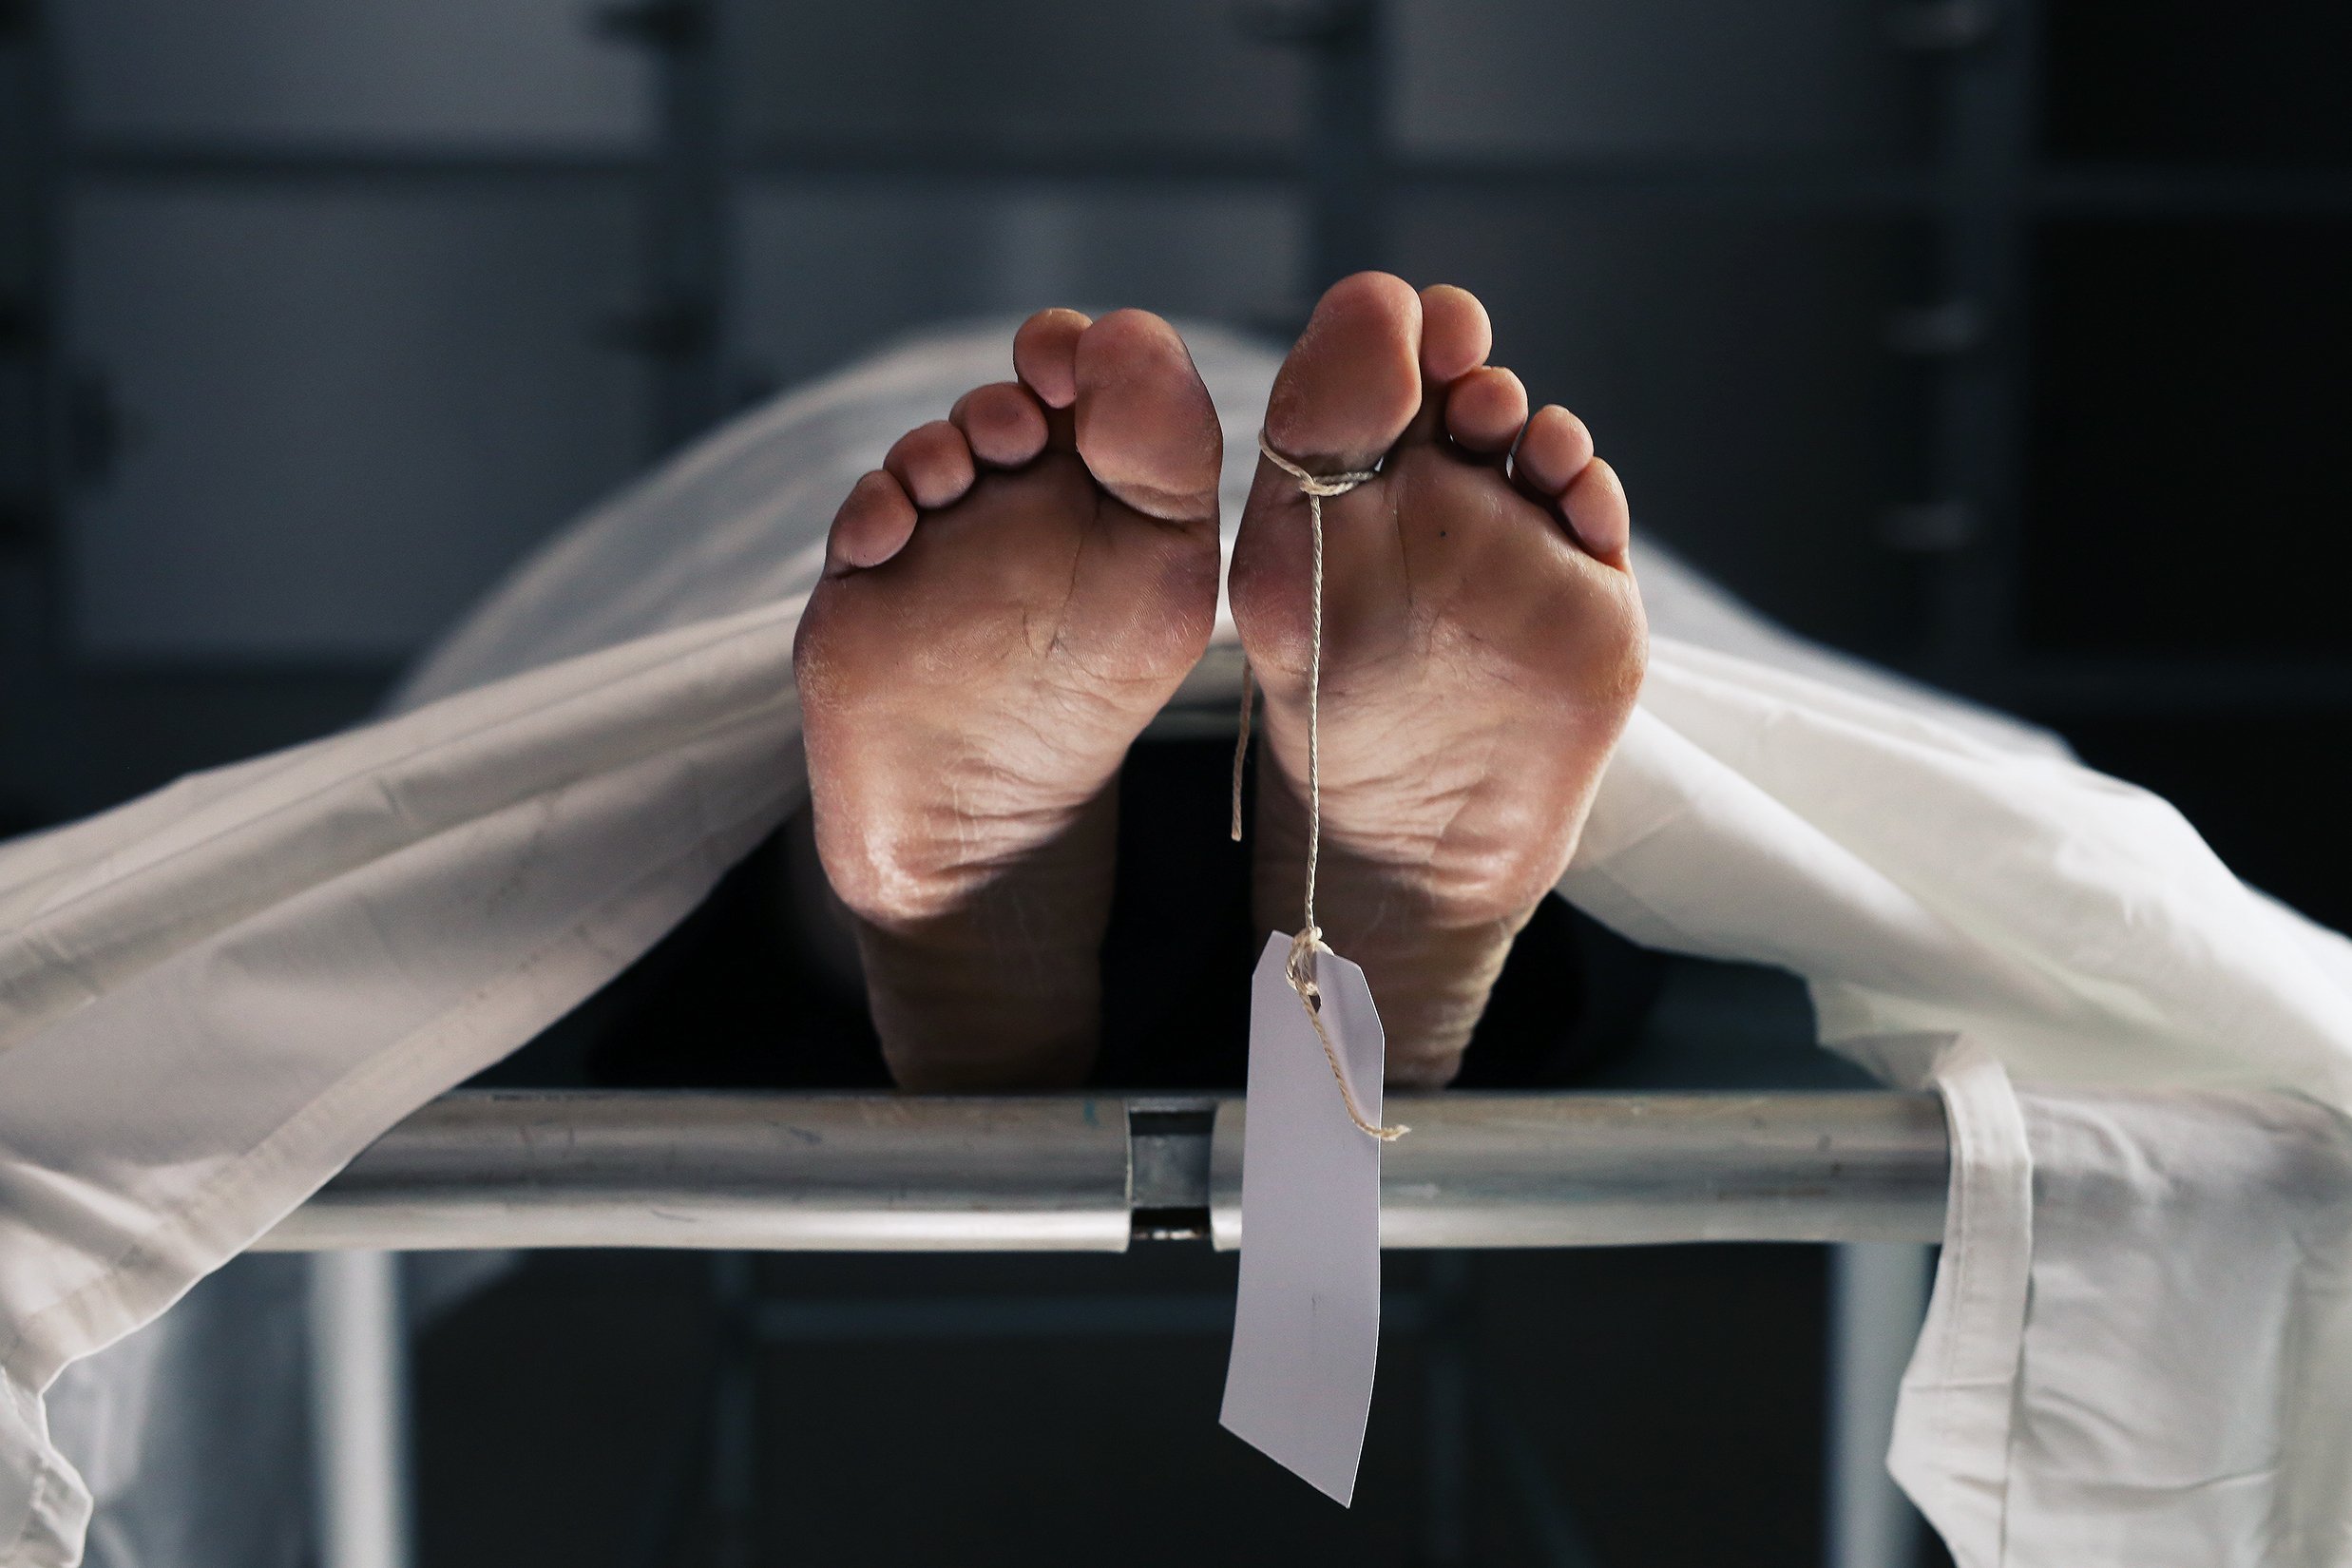 Body on a morgue table with a toe tag. | Source: Shutterstock